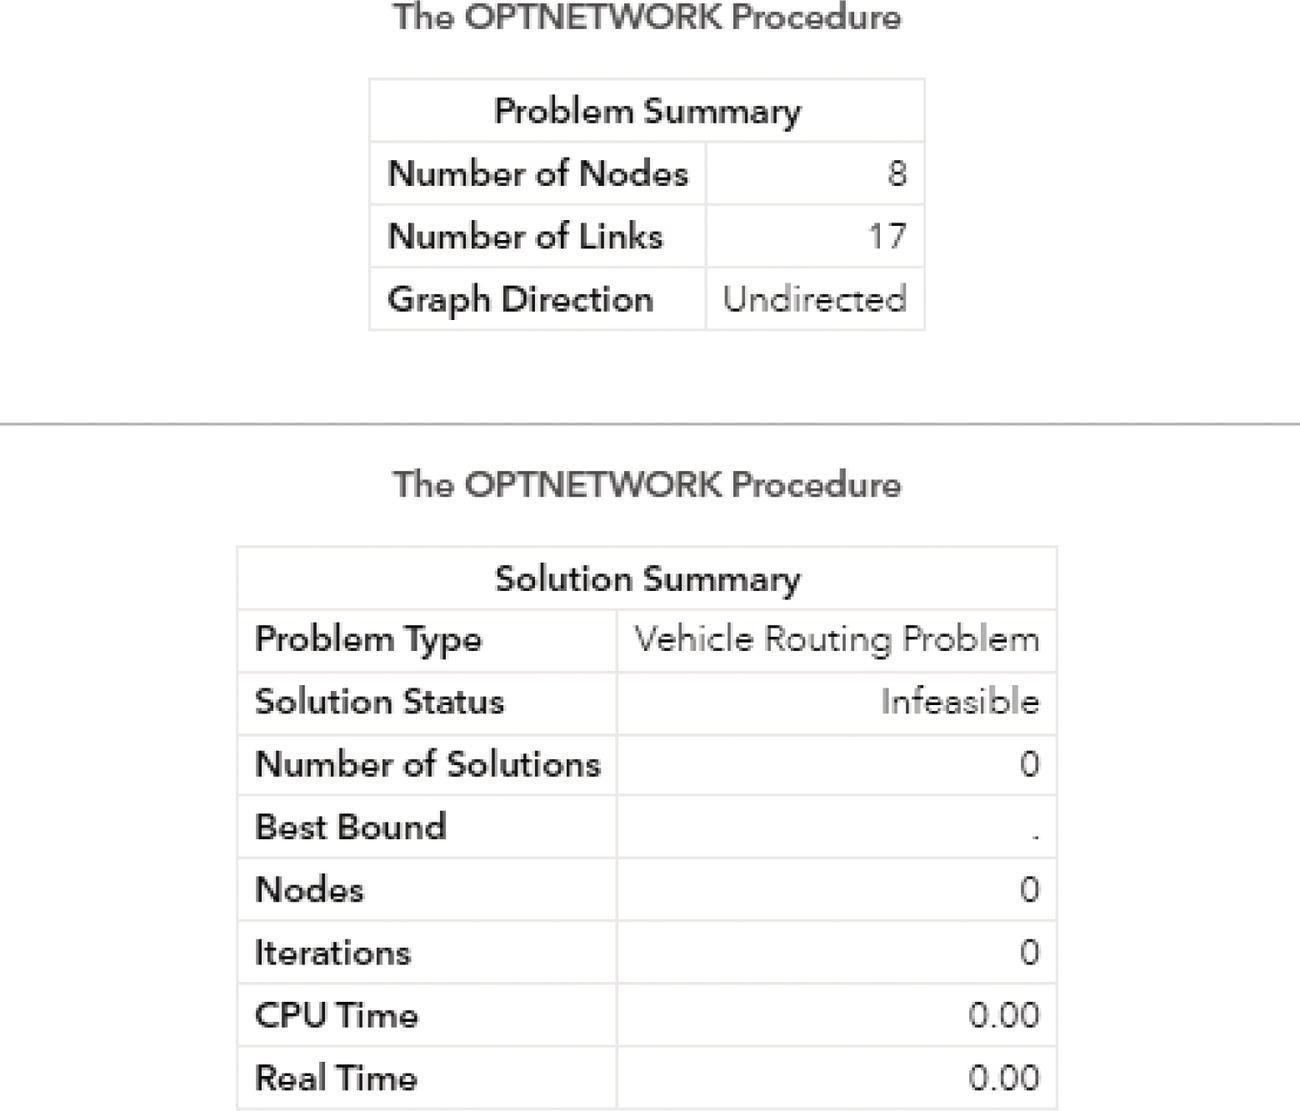 Screenshot of the infeasible solution for the vehicle routing problem when using a low maximum capacity for the vehicle.